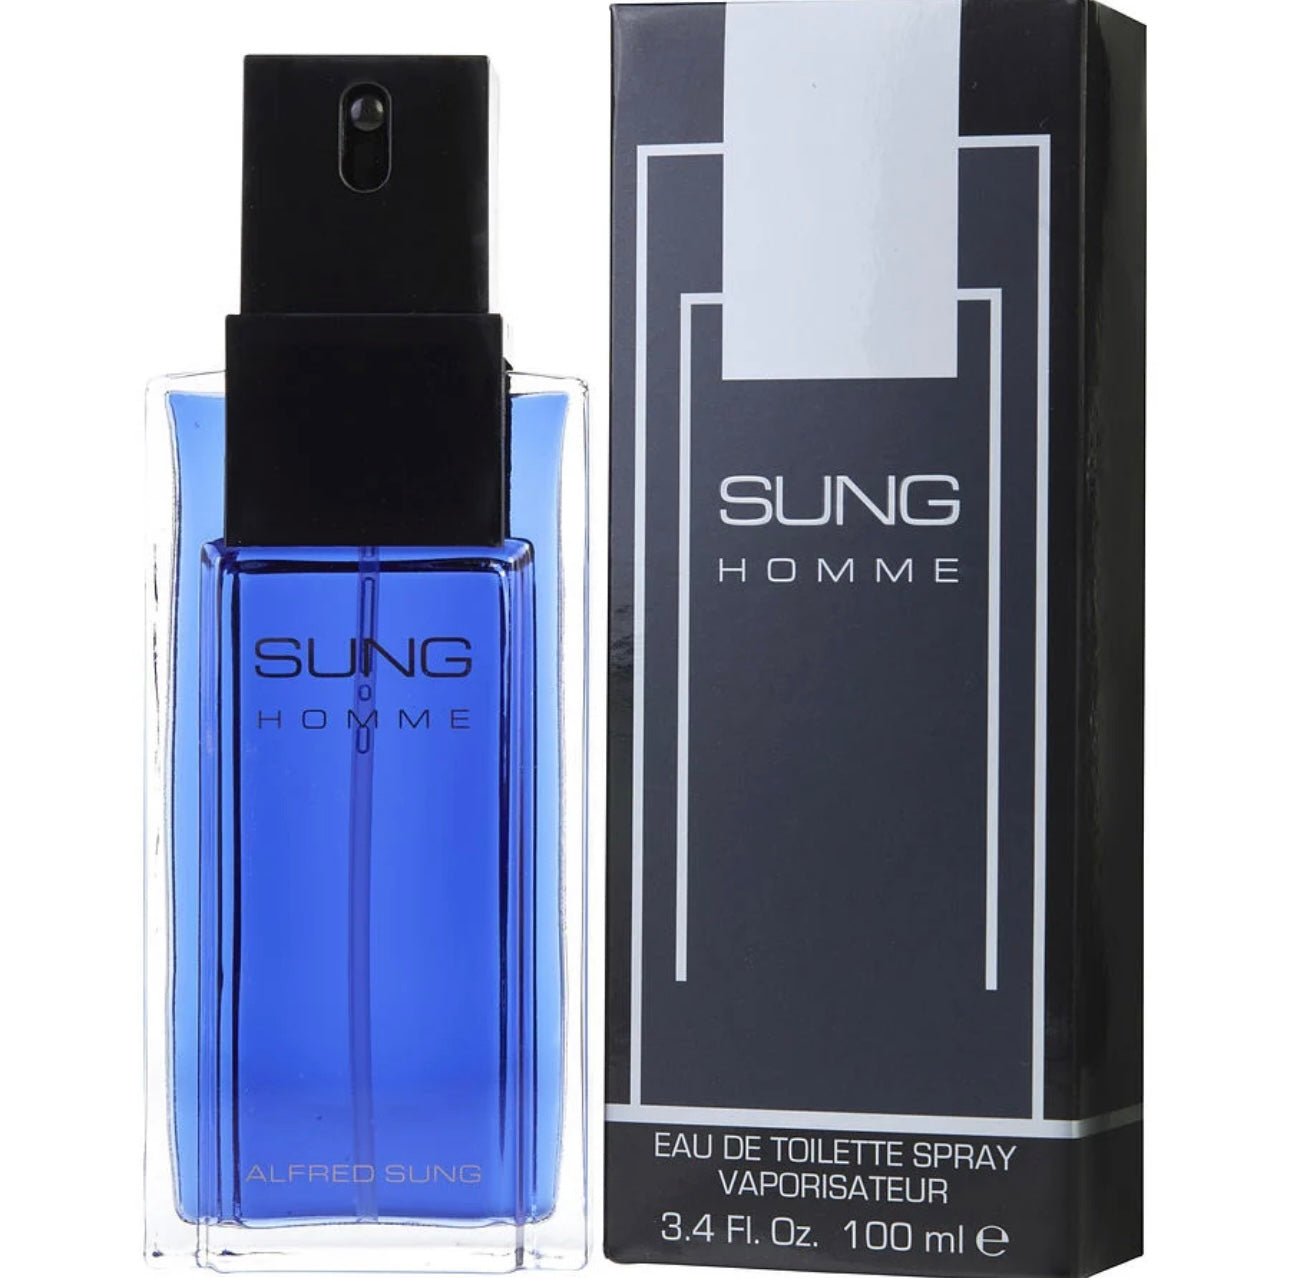 Alfred Sung- Sung Homme-EdT